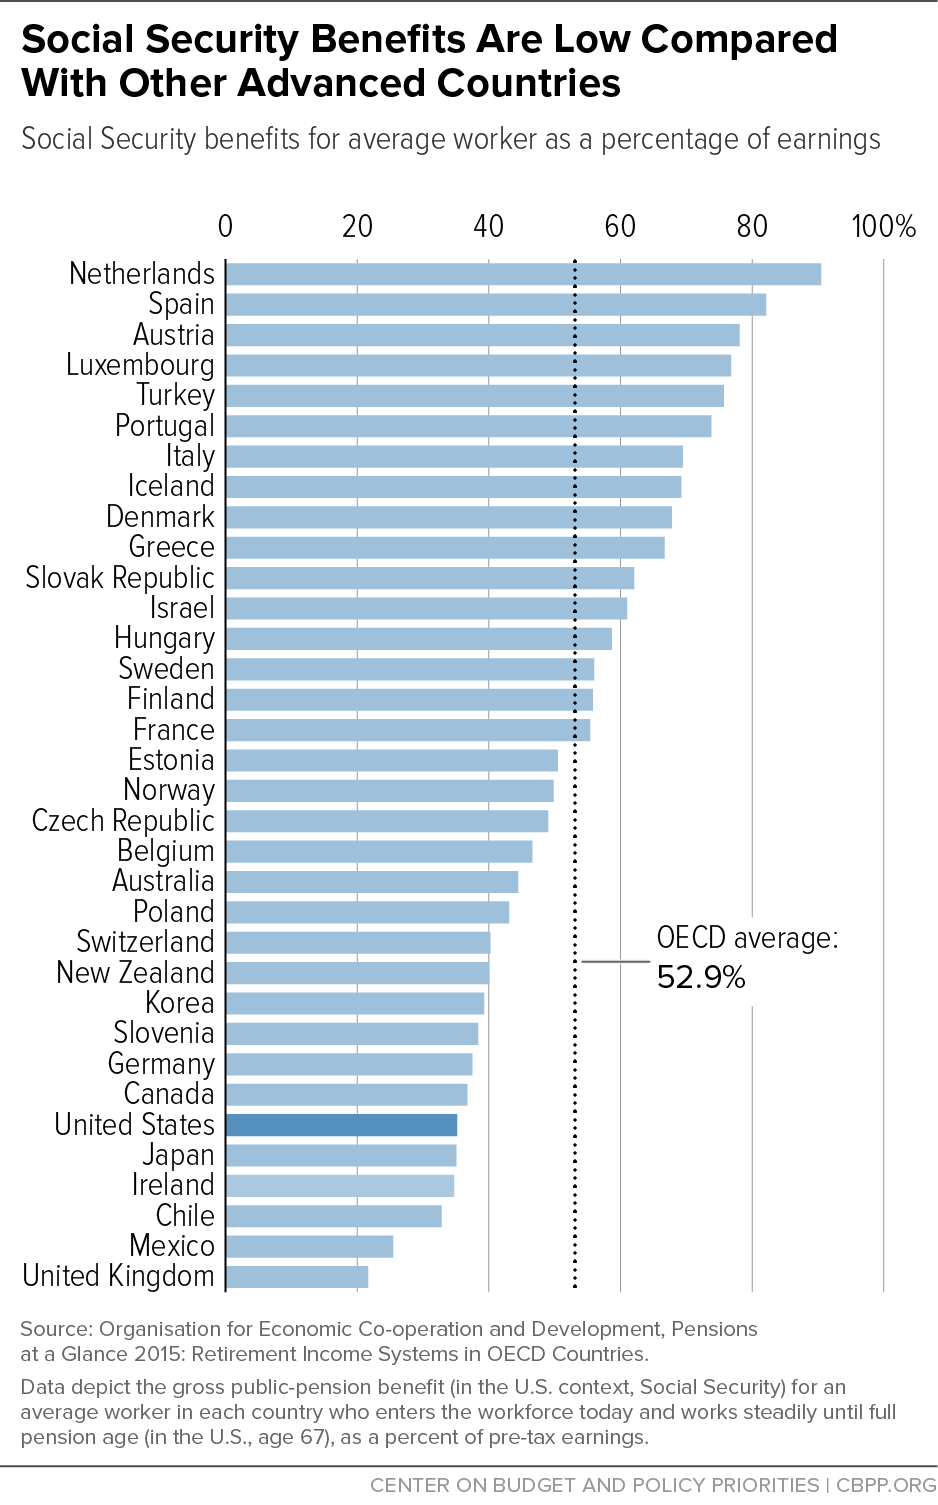 Social Security Benefits Are Low Compared With Other Advanced Countries 